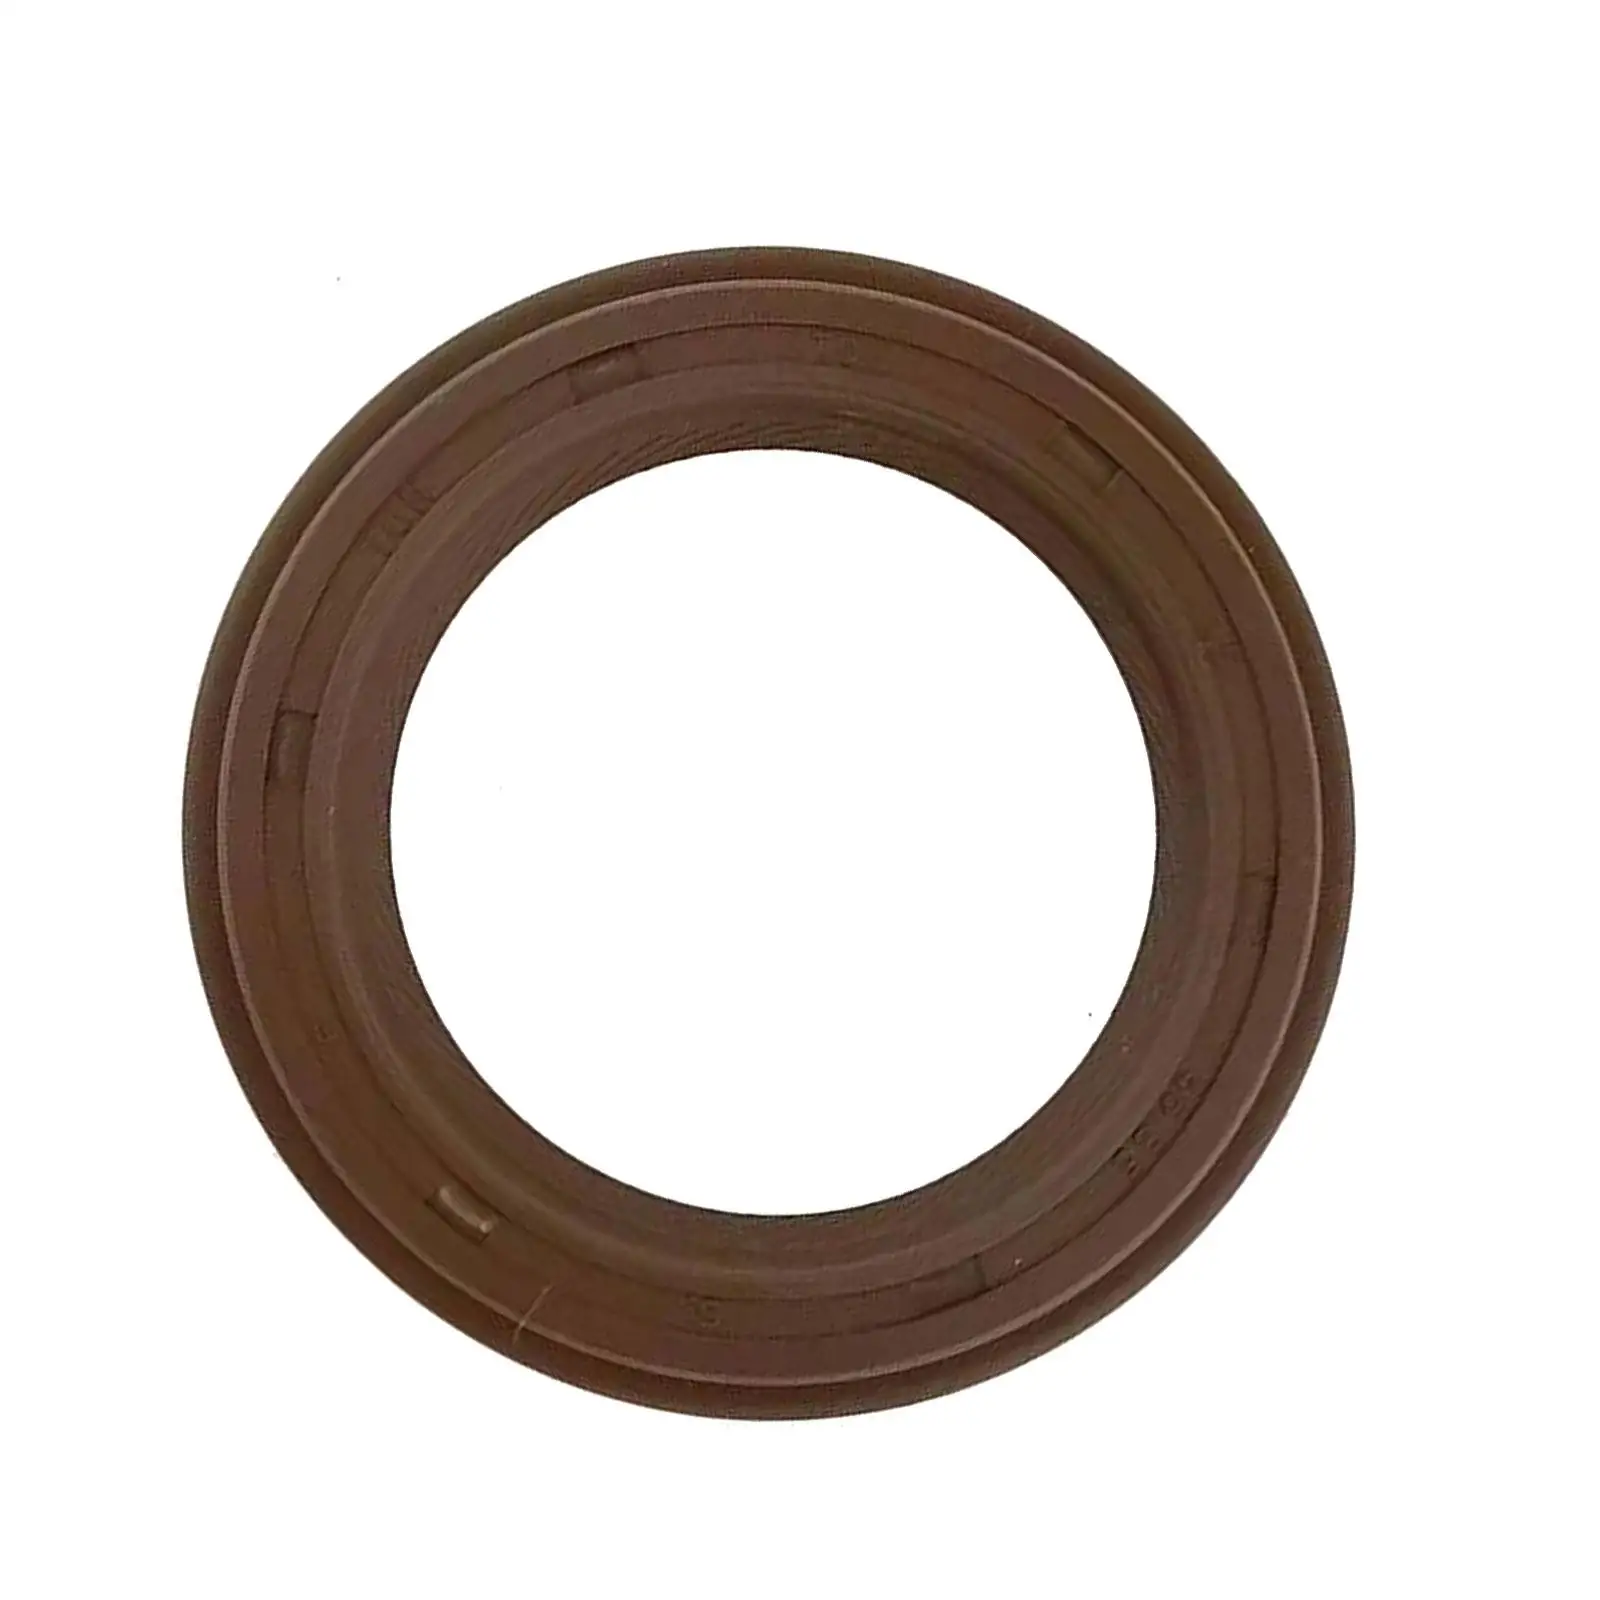 Oil Seal 93102-35M47 Replacement Repair Part for Outboard 25HP Professional